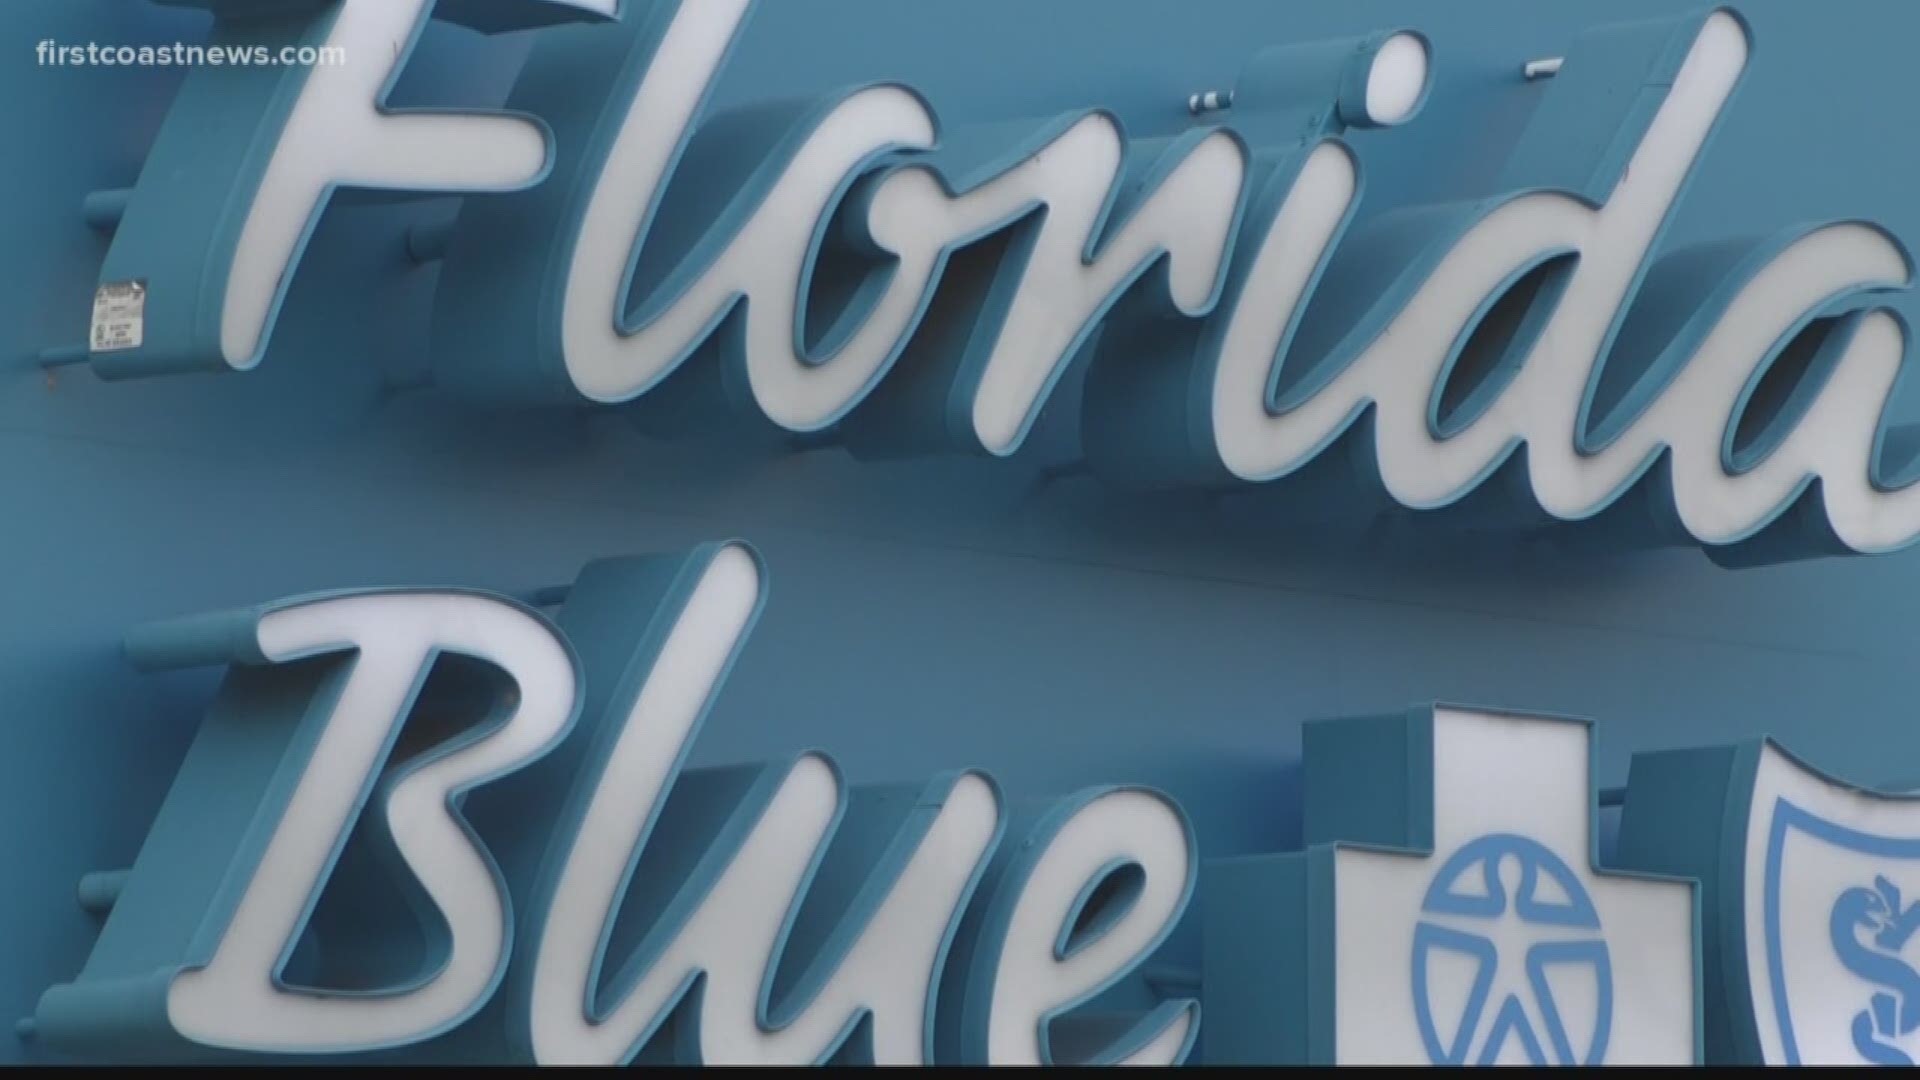 Florida Blue says it's hosting a job fair July 13, looking to hire 255 people who will work nine months per year but get paid year-round.